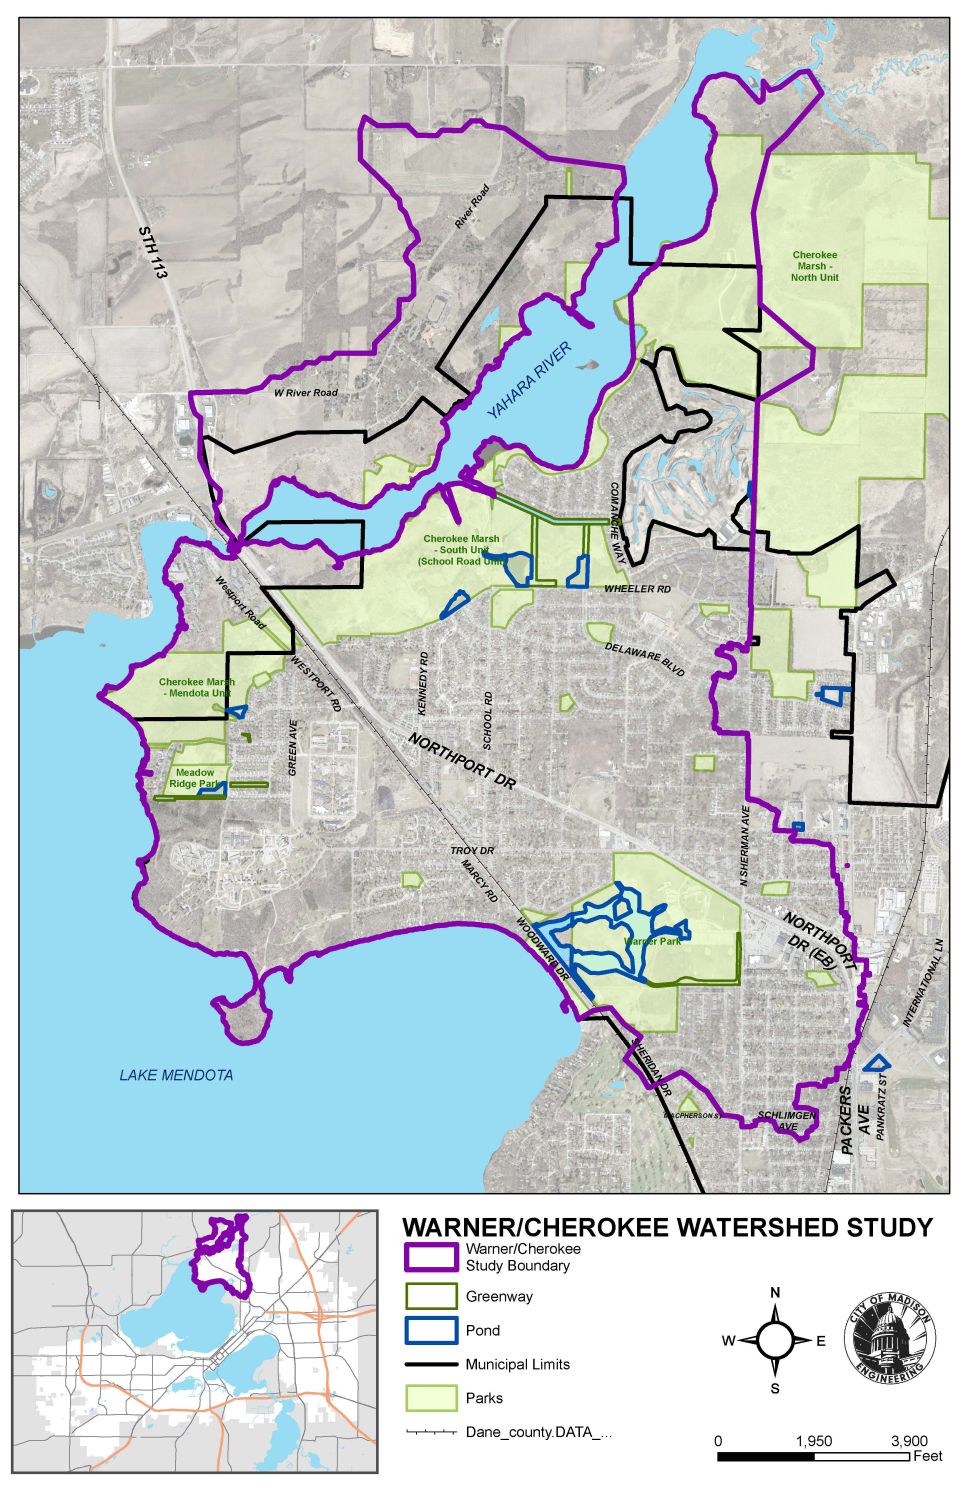 Warner Cherokee Watershed Study outlined in purple. The approximate extents are from Schlimgen Ave north along Sherman until the Cherokee Marsh with just west of the Yahara River being the western border of the study.